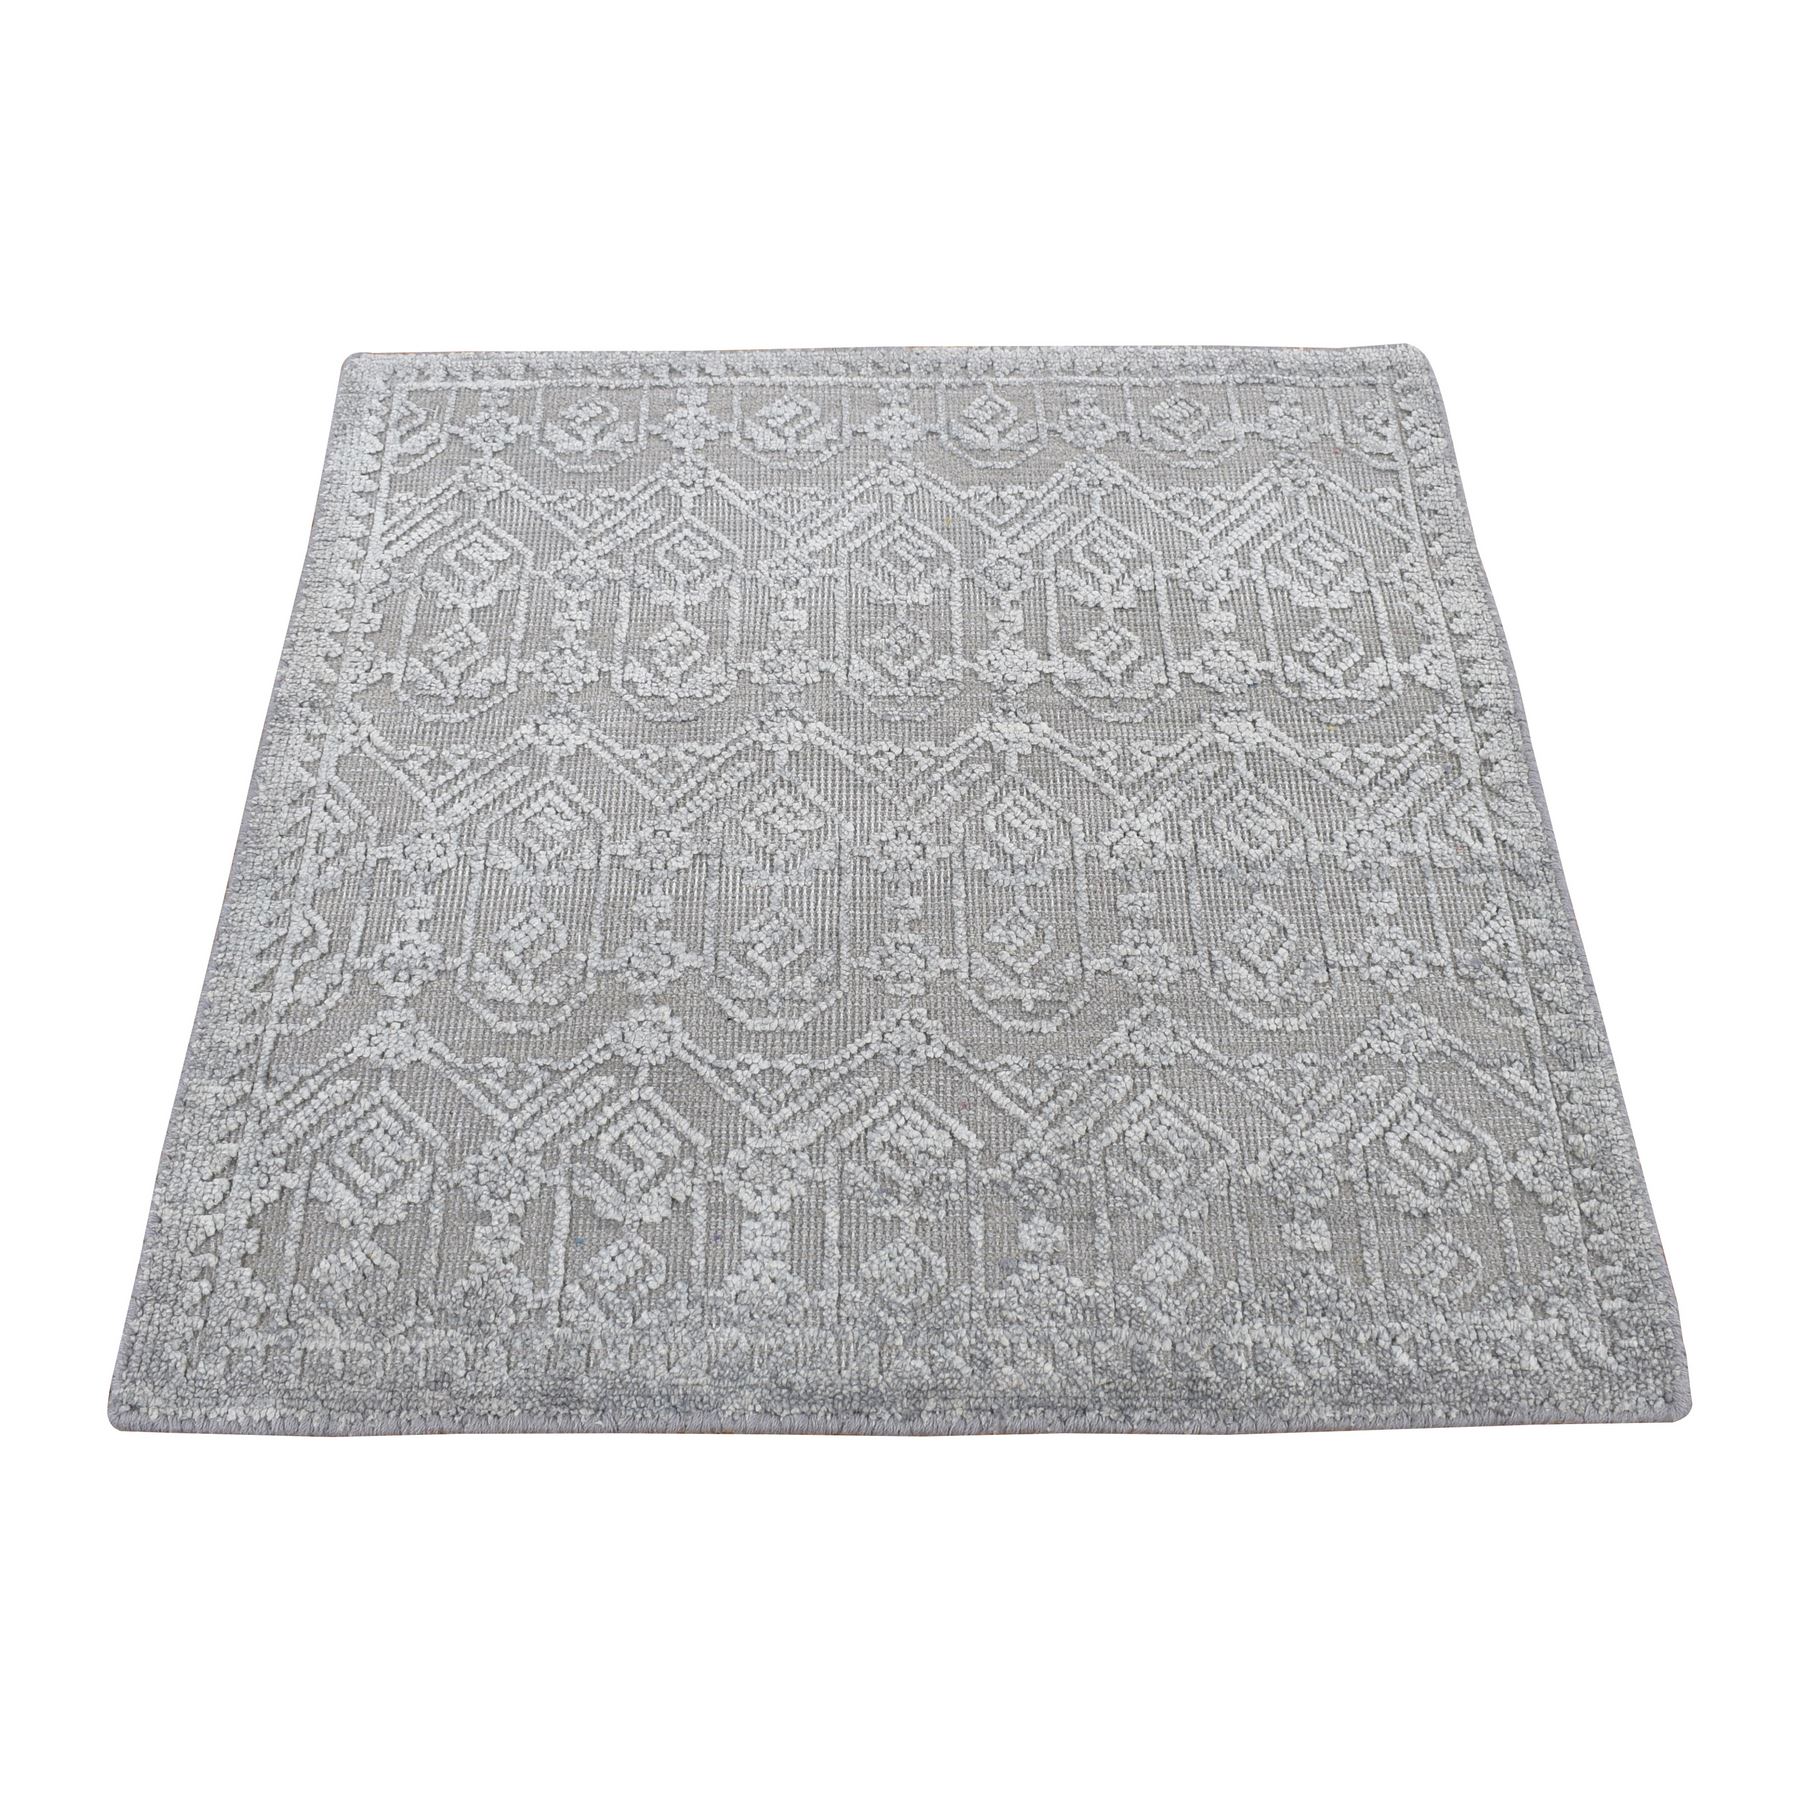 Wool and Silk Rugs LUV702189